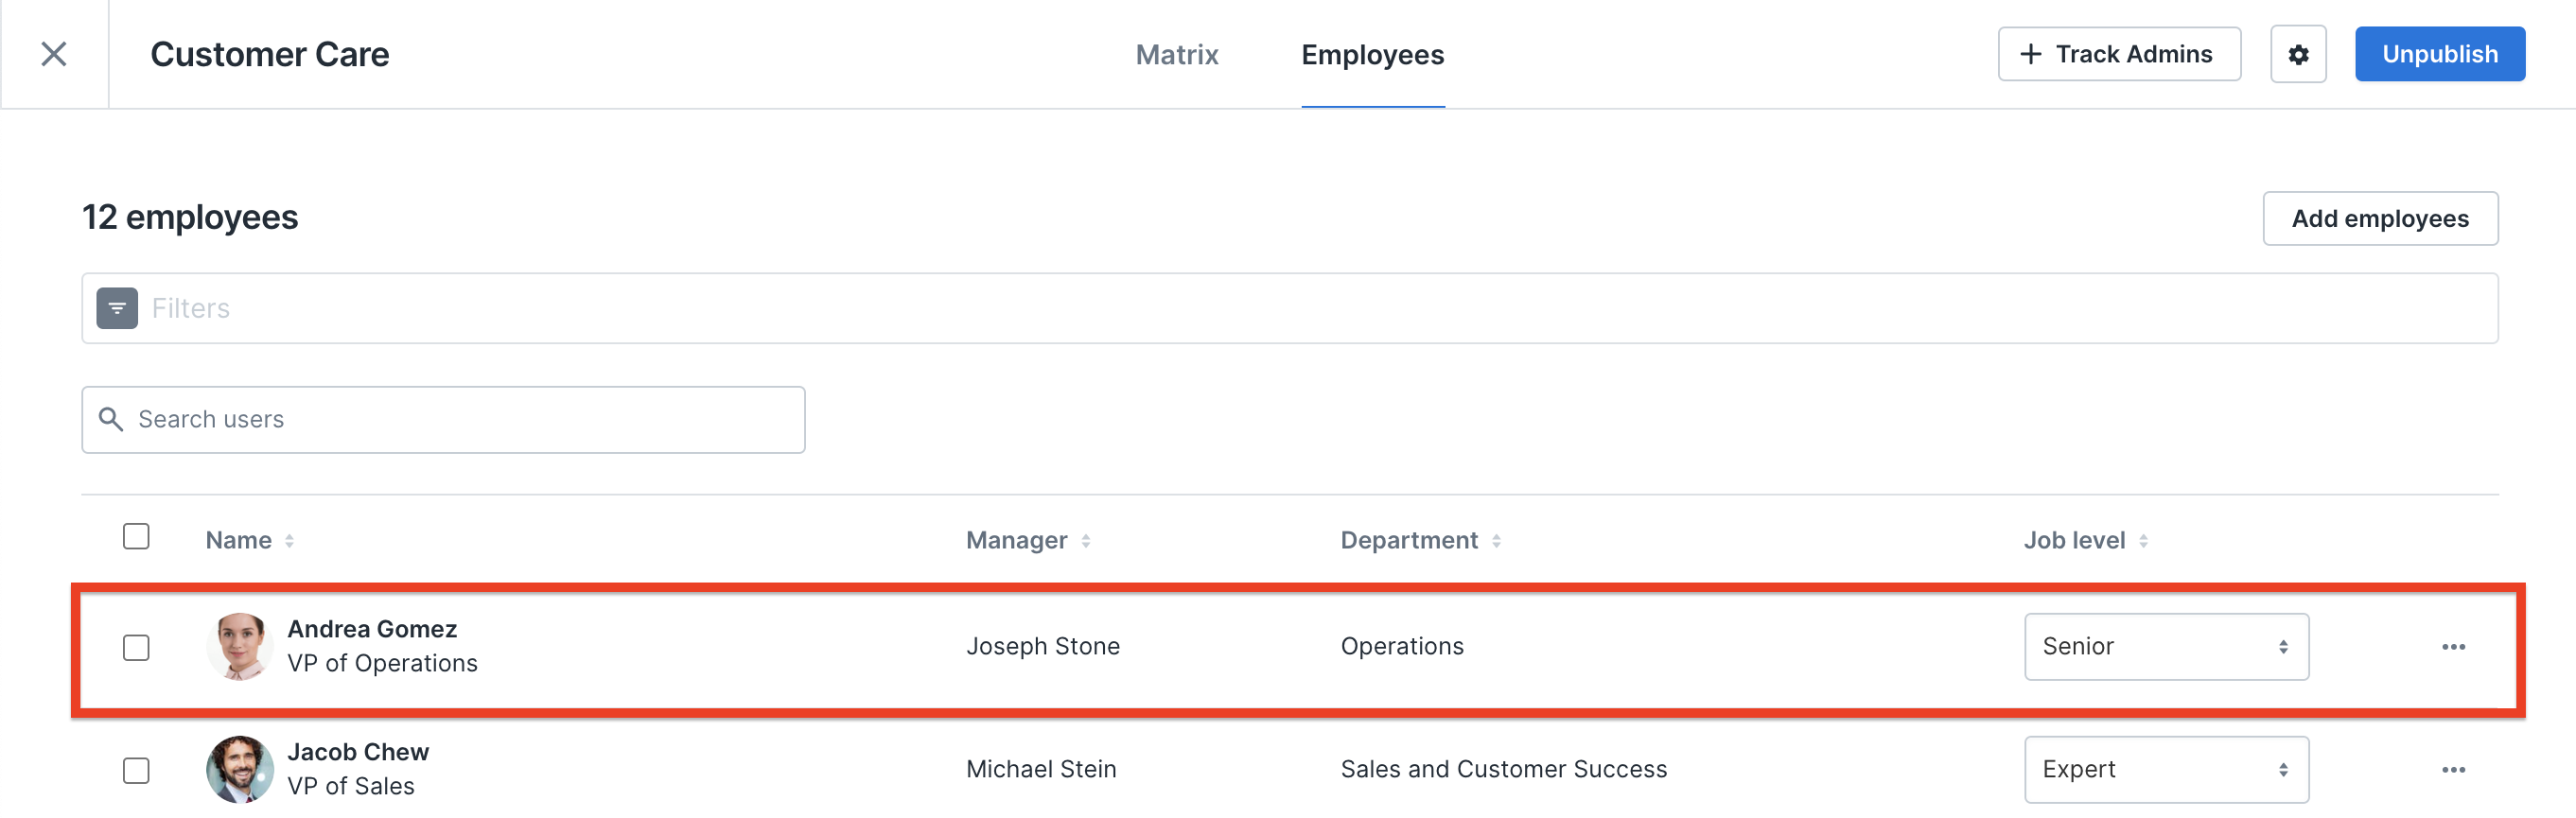 Grow track open to the Employees tab. A square highlights an example employee assigned to the track, Andrea Gomez. 